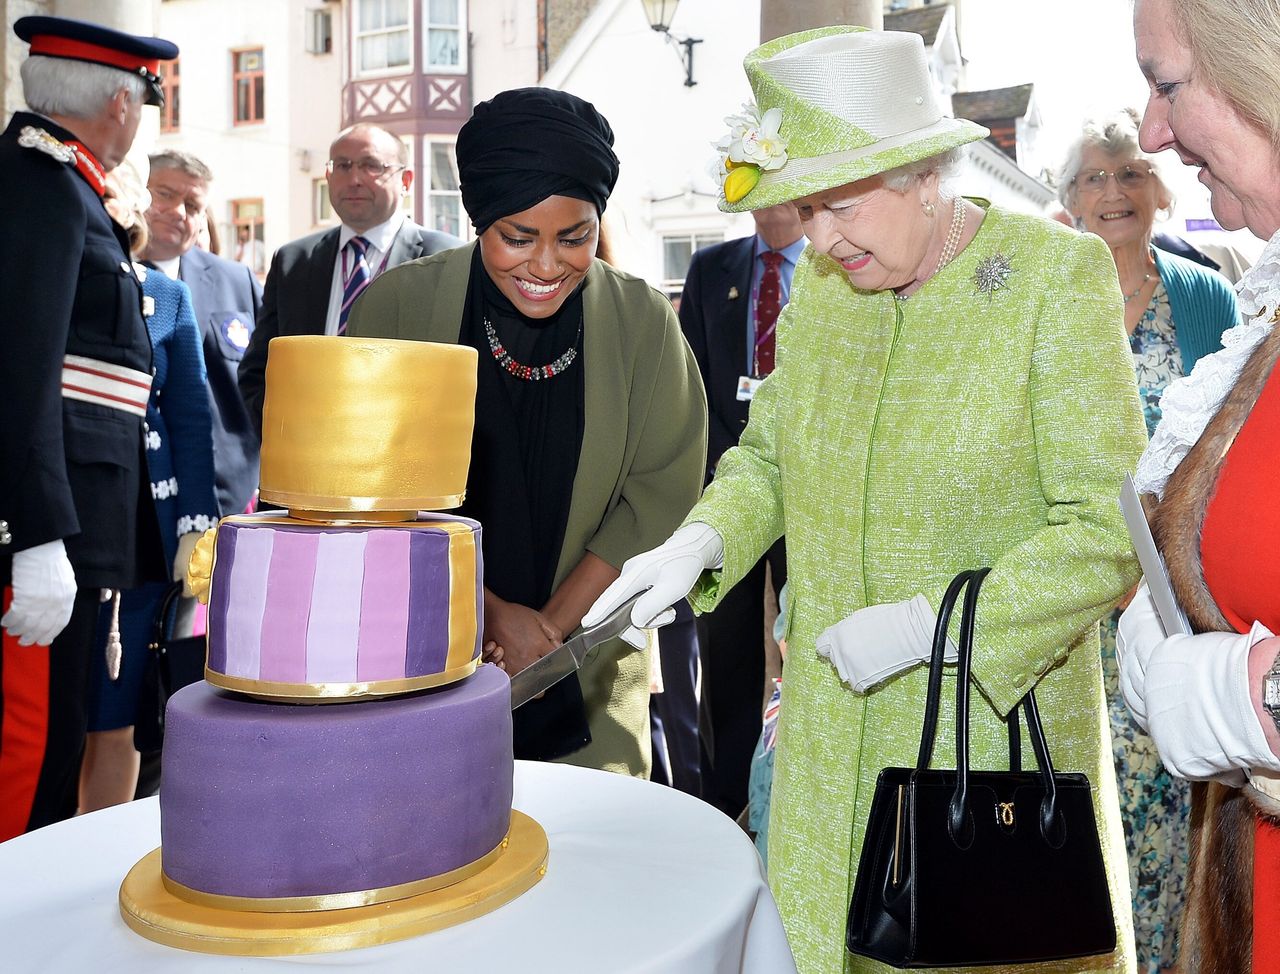 Queen Elizabeth II cuts into a birthday cake baked by Nadiya Hussain, left, during the queen's 90th birthday celebration in April 2016.